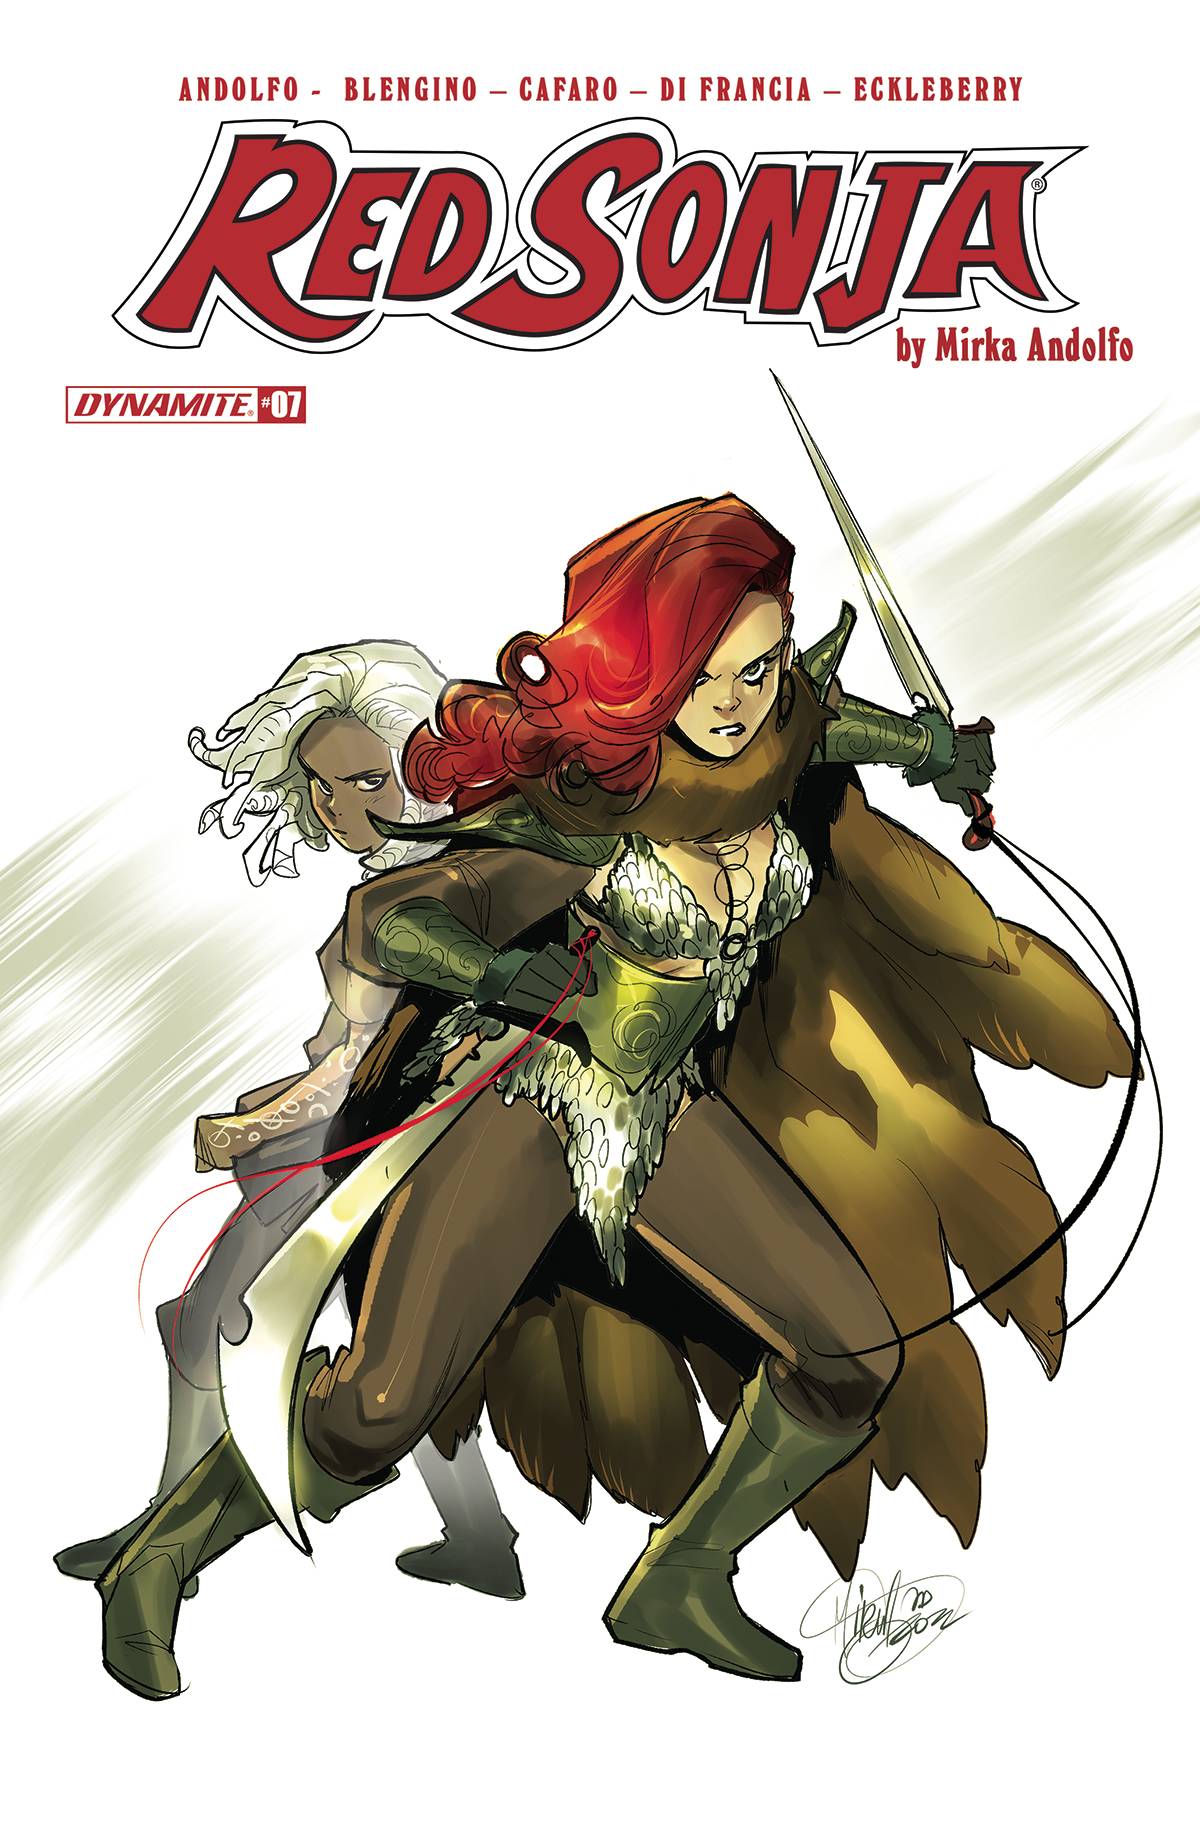 Red Sonja #7 Cover A Andolfo (2021)